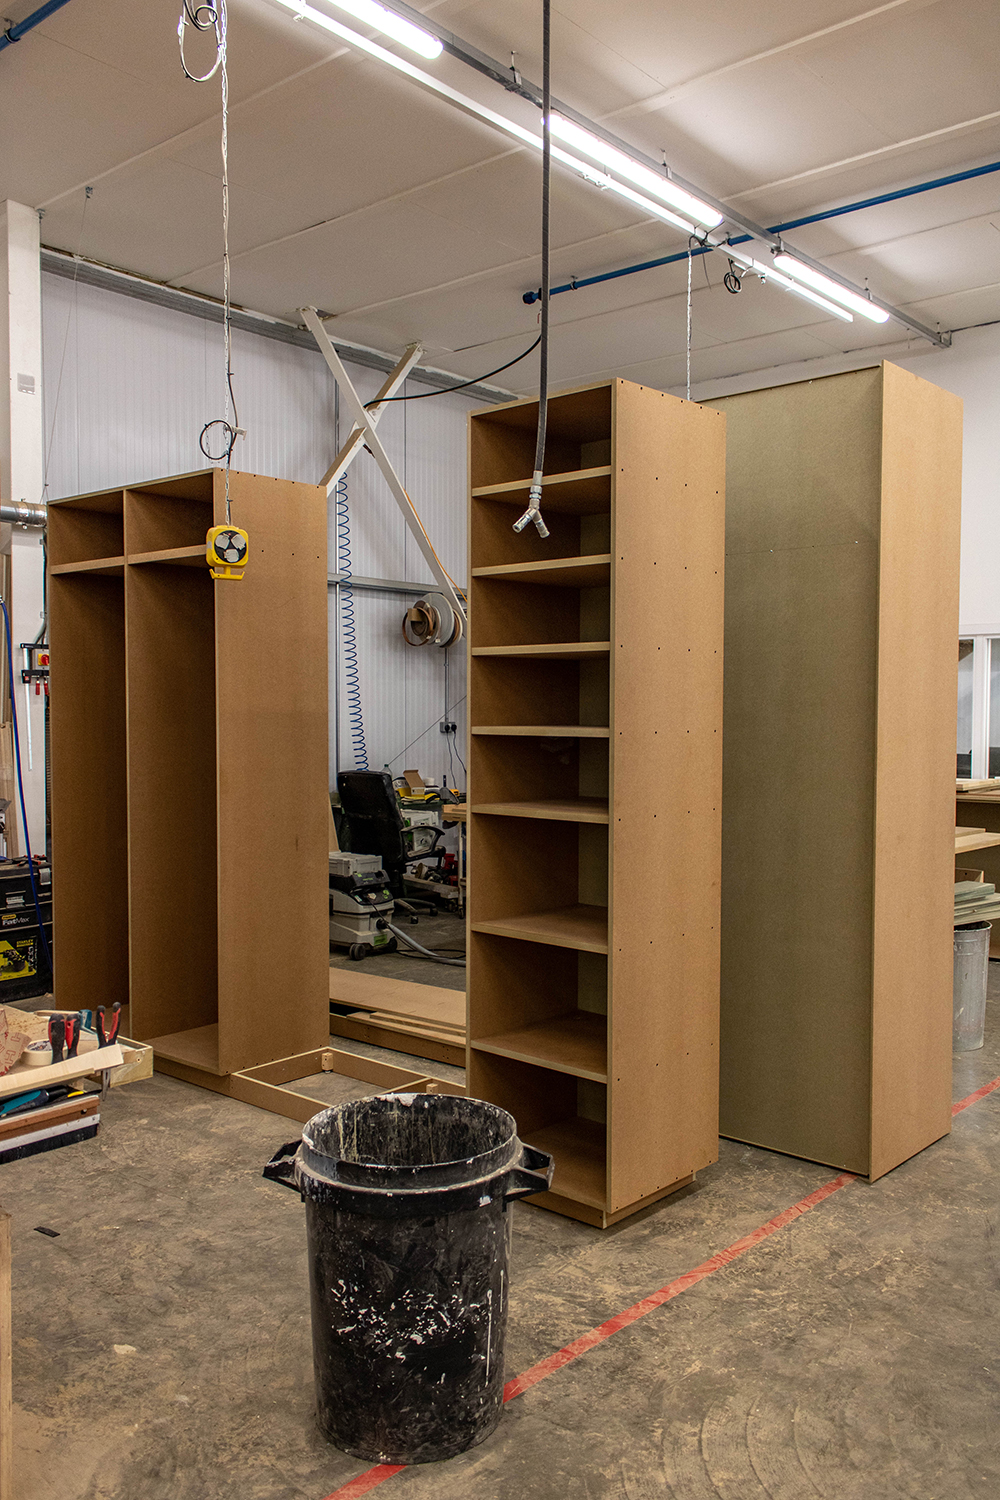 Early construction of tall shelving unit